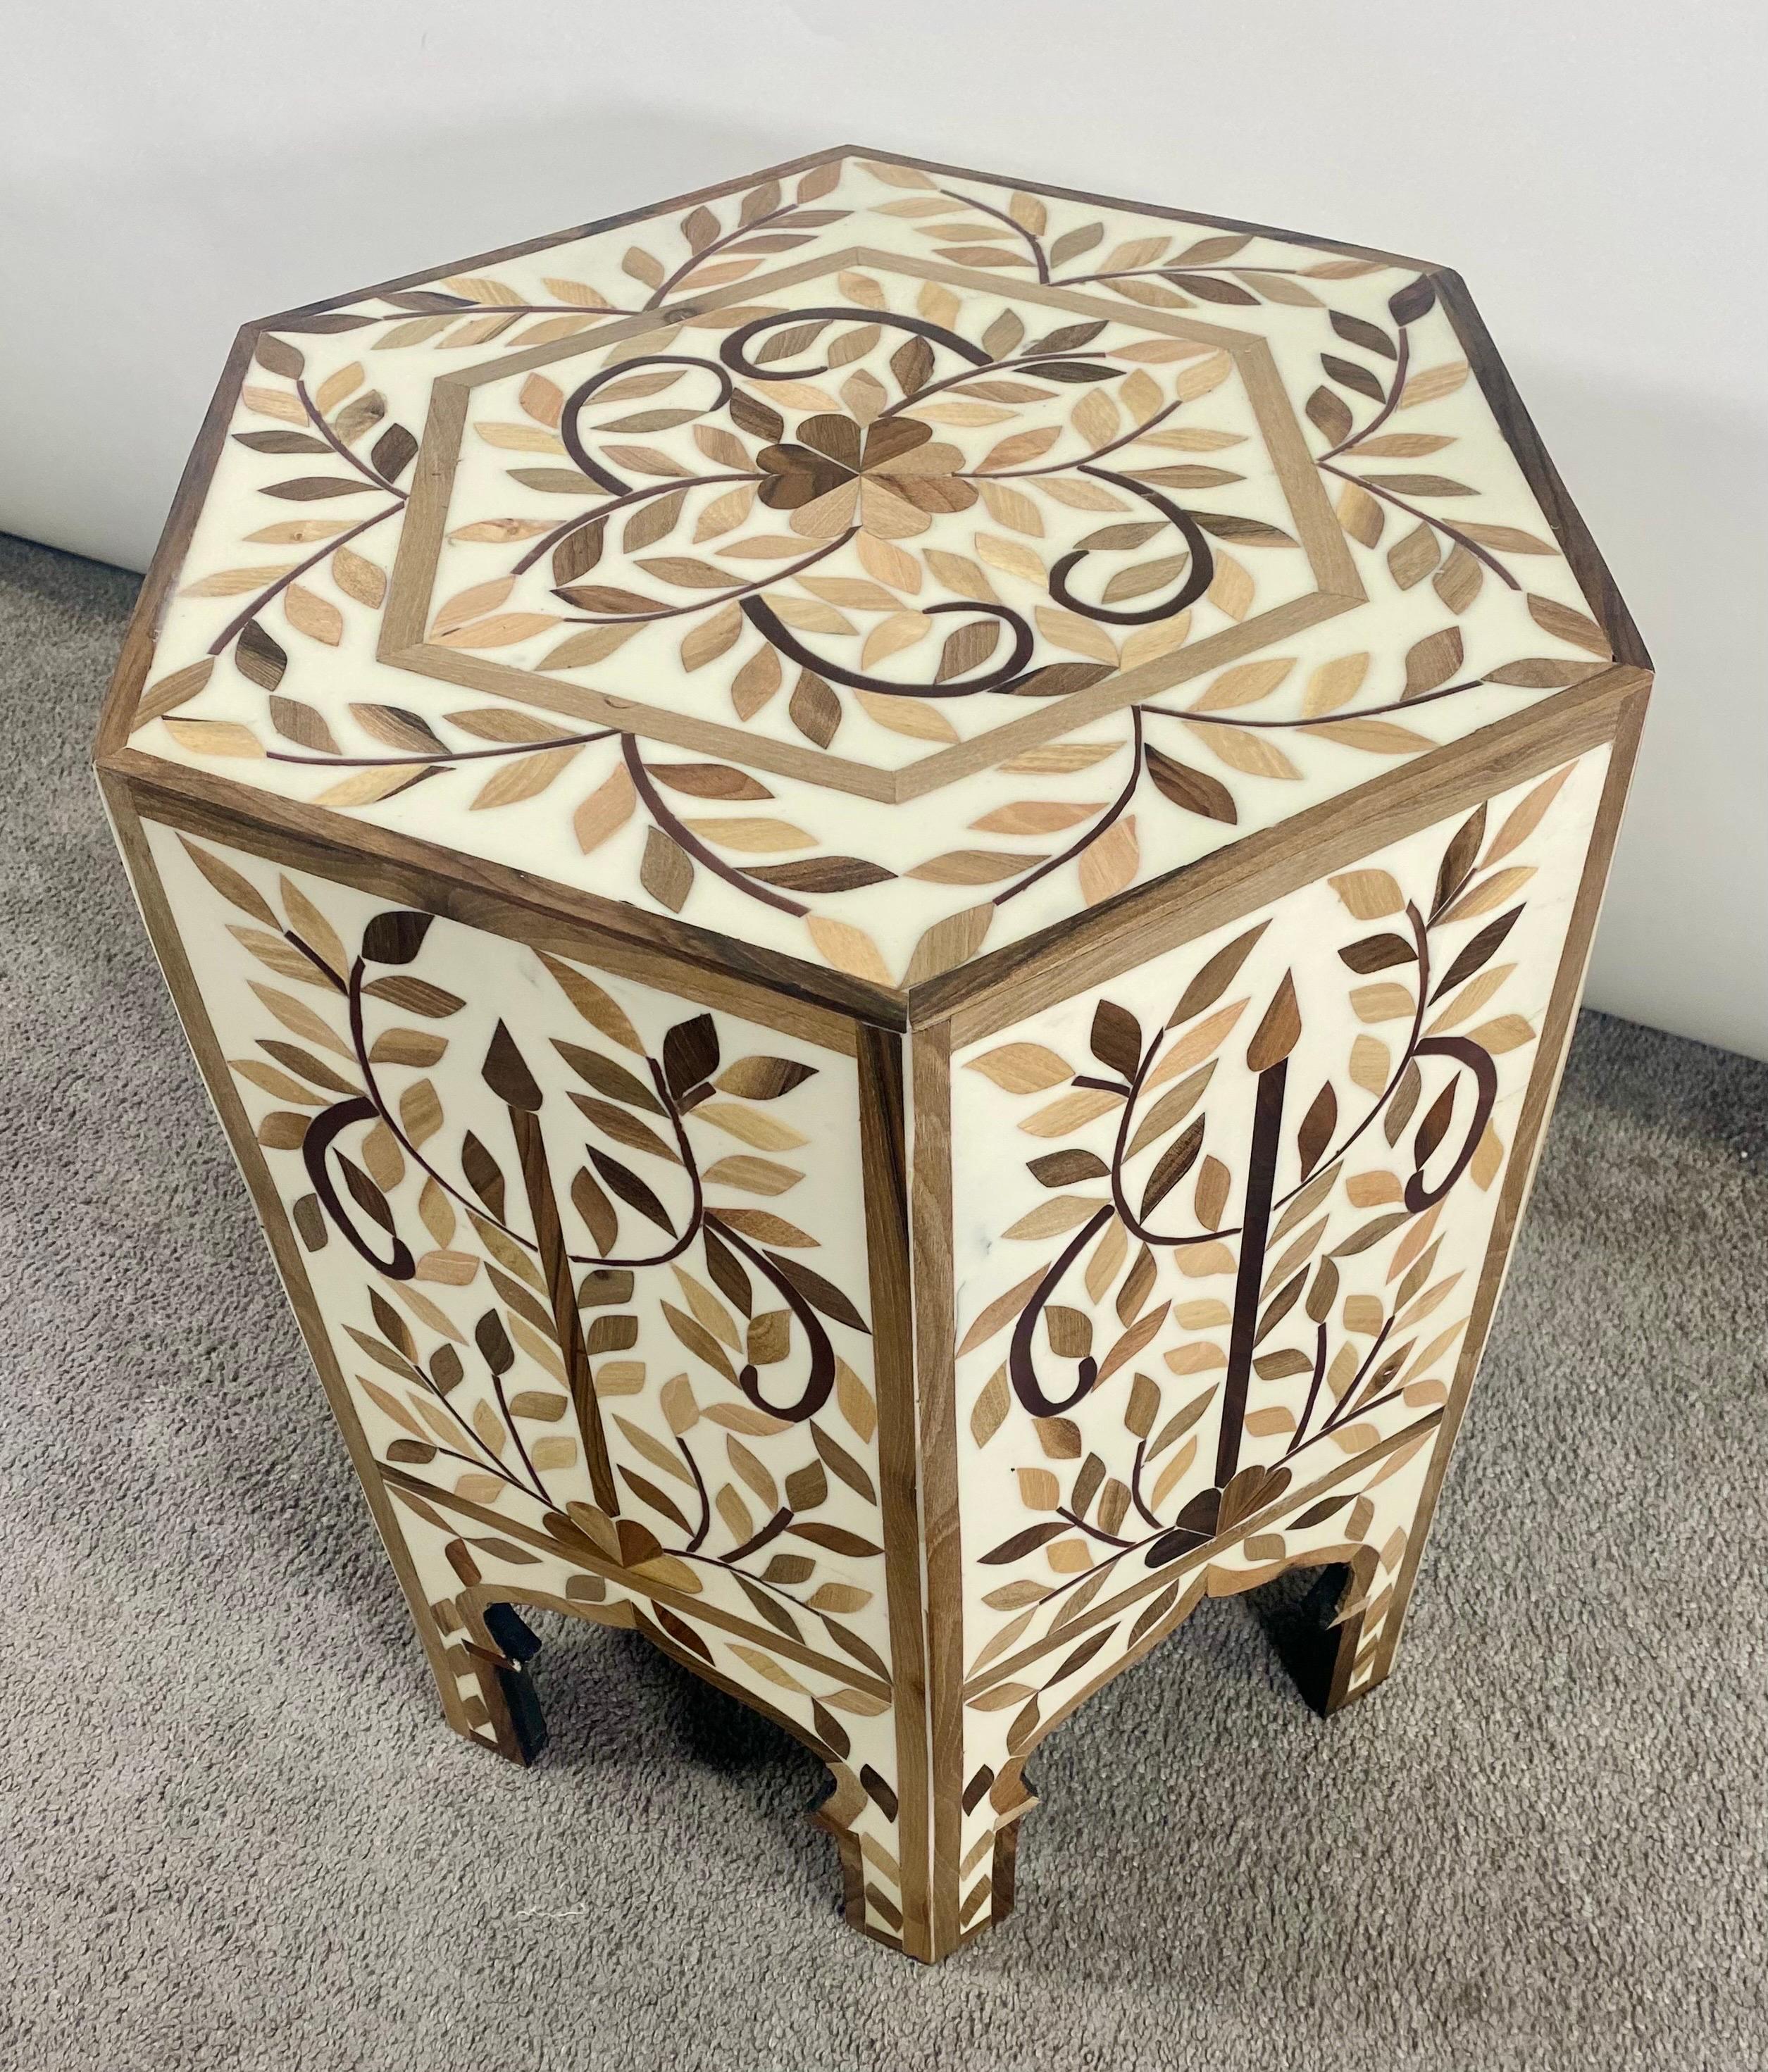 20th Century Moroccan Boho Chic Leaf Design Resin & Walnut Hexagonal Side or End Table, Pair For Sale